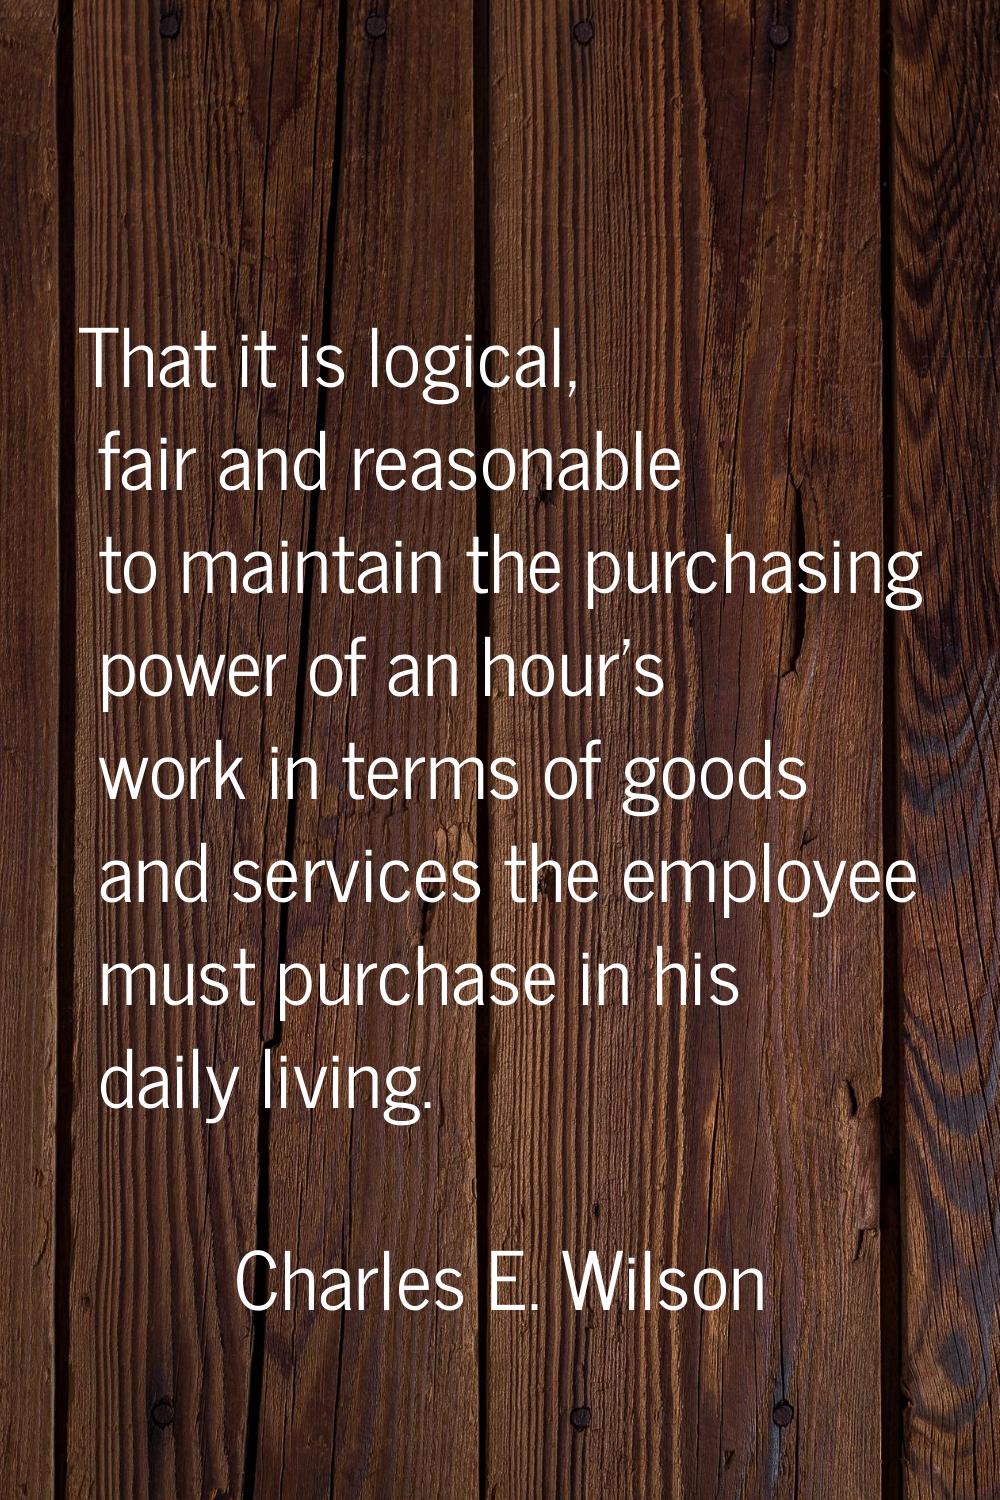 That it is logical, fair and reasonable to maintain the purchasing power of an hour's work in terms